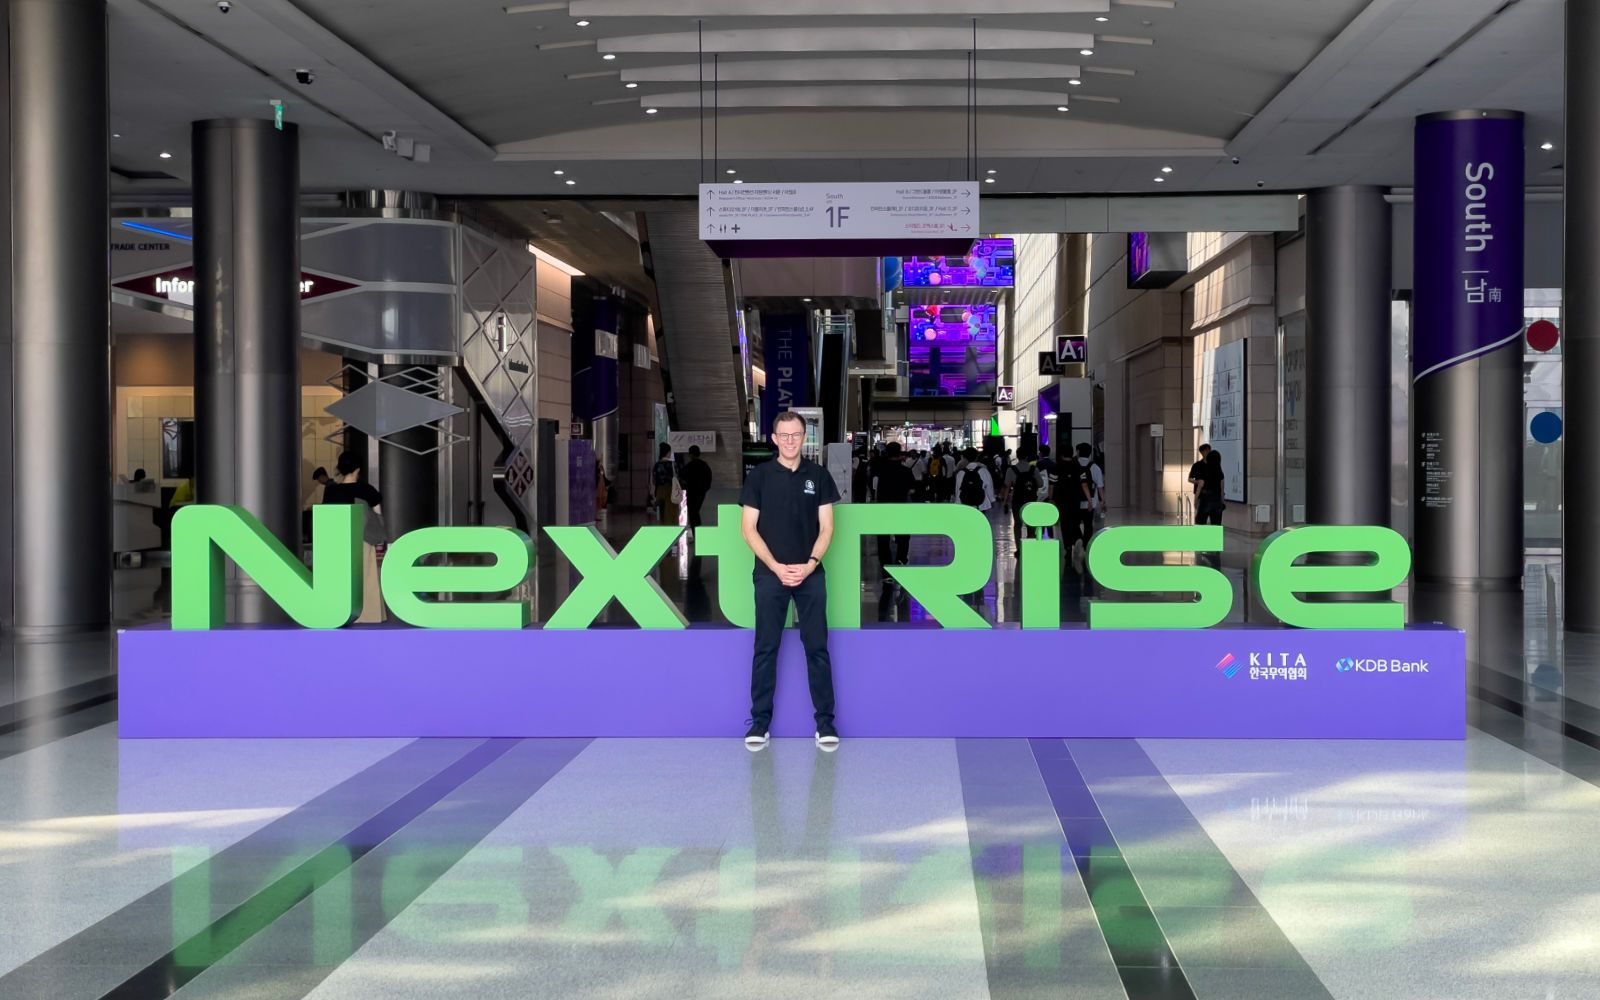 Florian in front of the NextRise logo.